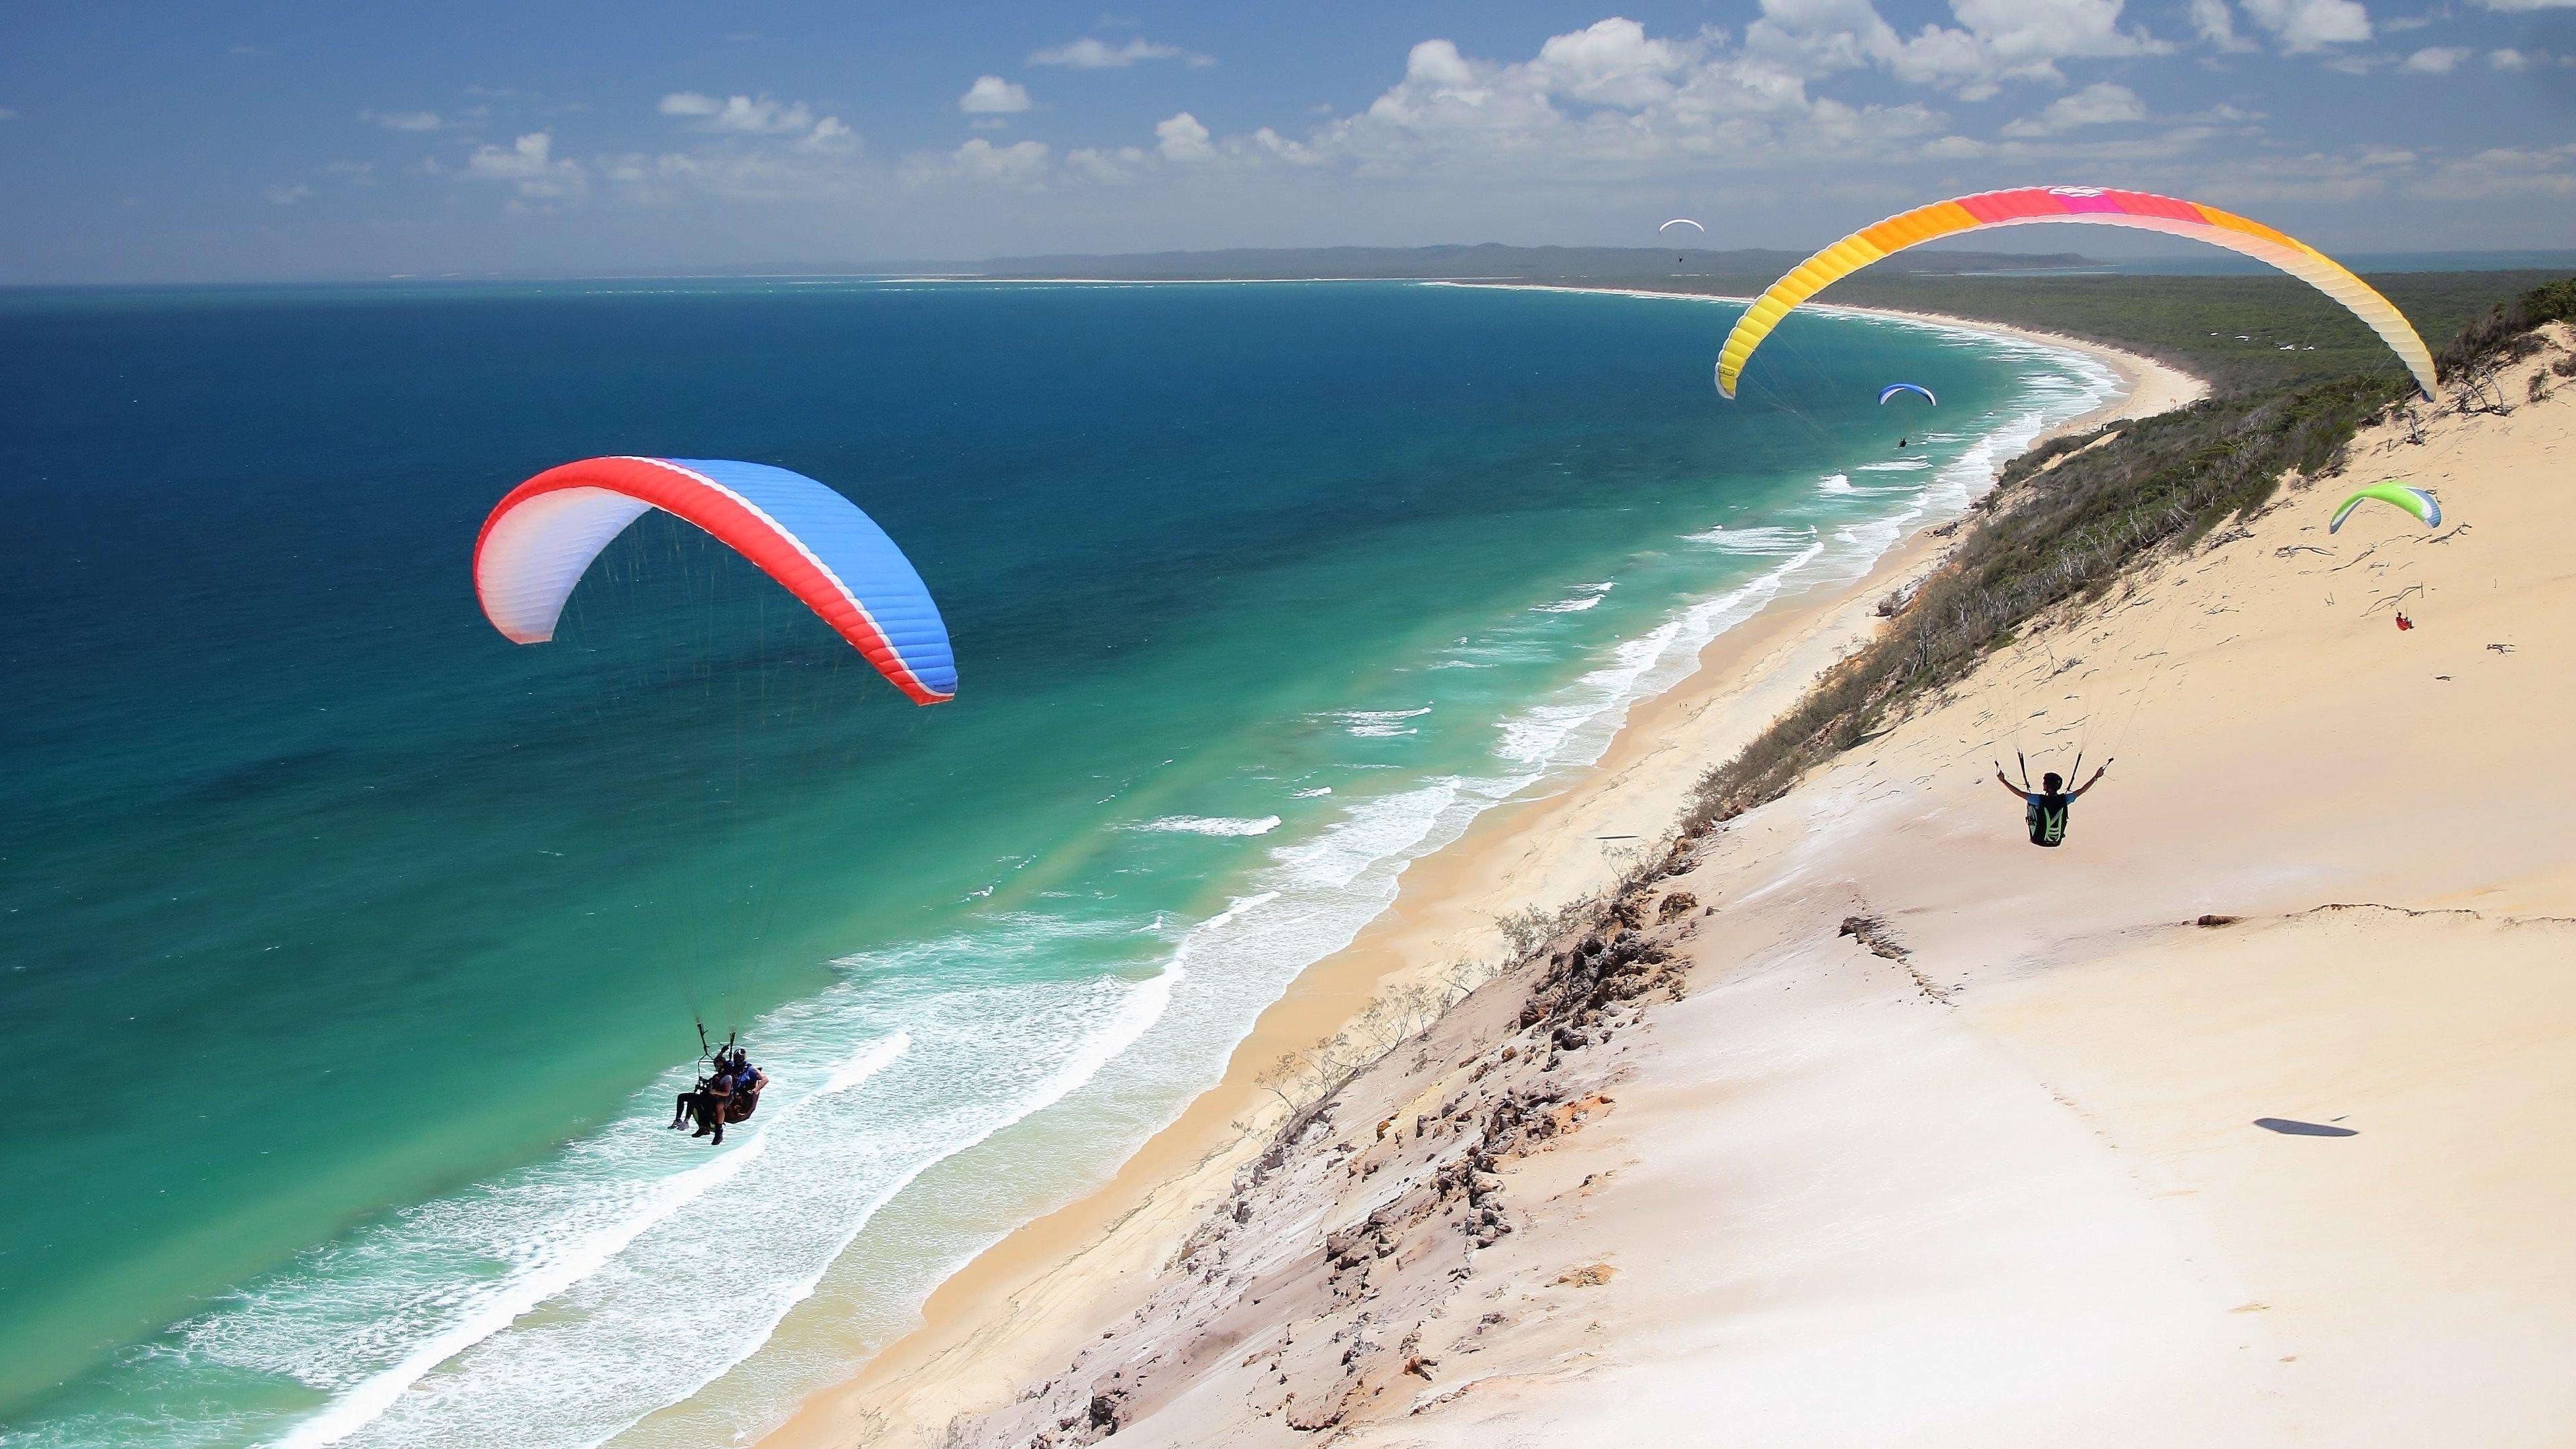 Sports Paragliding Wallpaper Picture HD Sports for HD 16:9 High